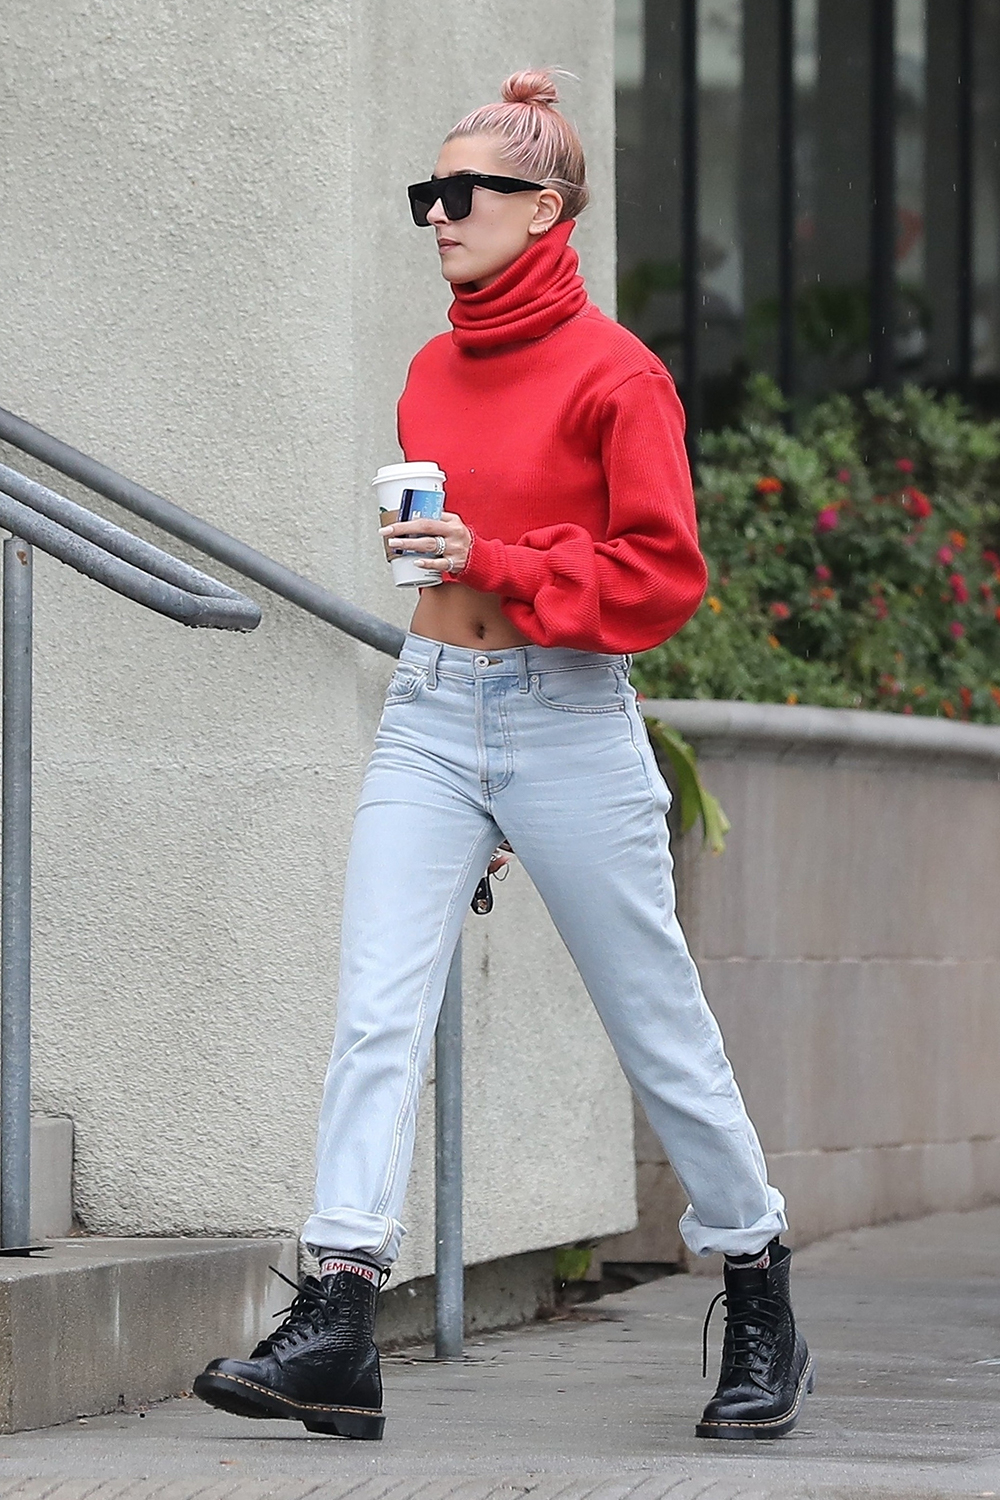 Hailey Baldwin cropped sweater and jeans